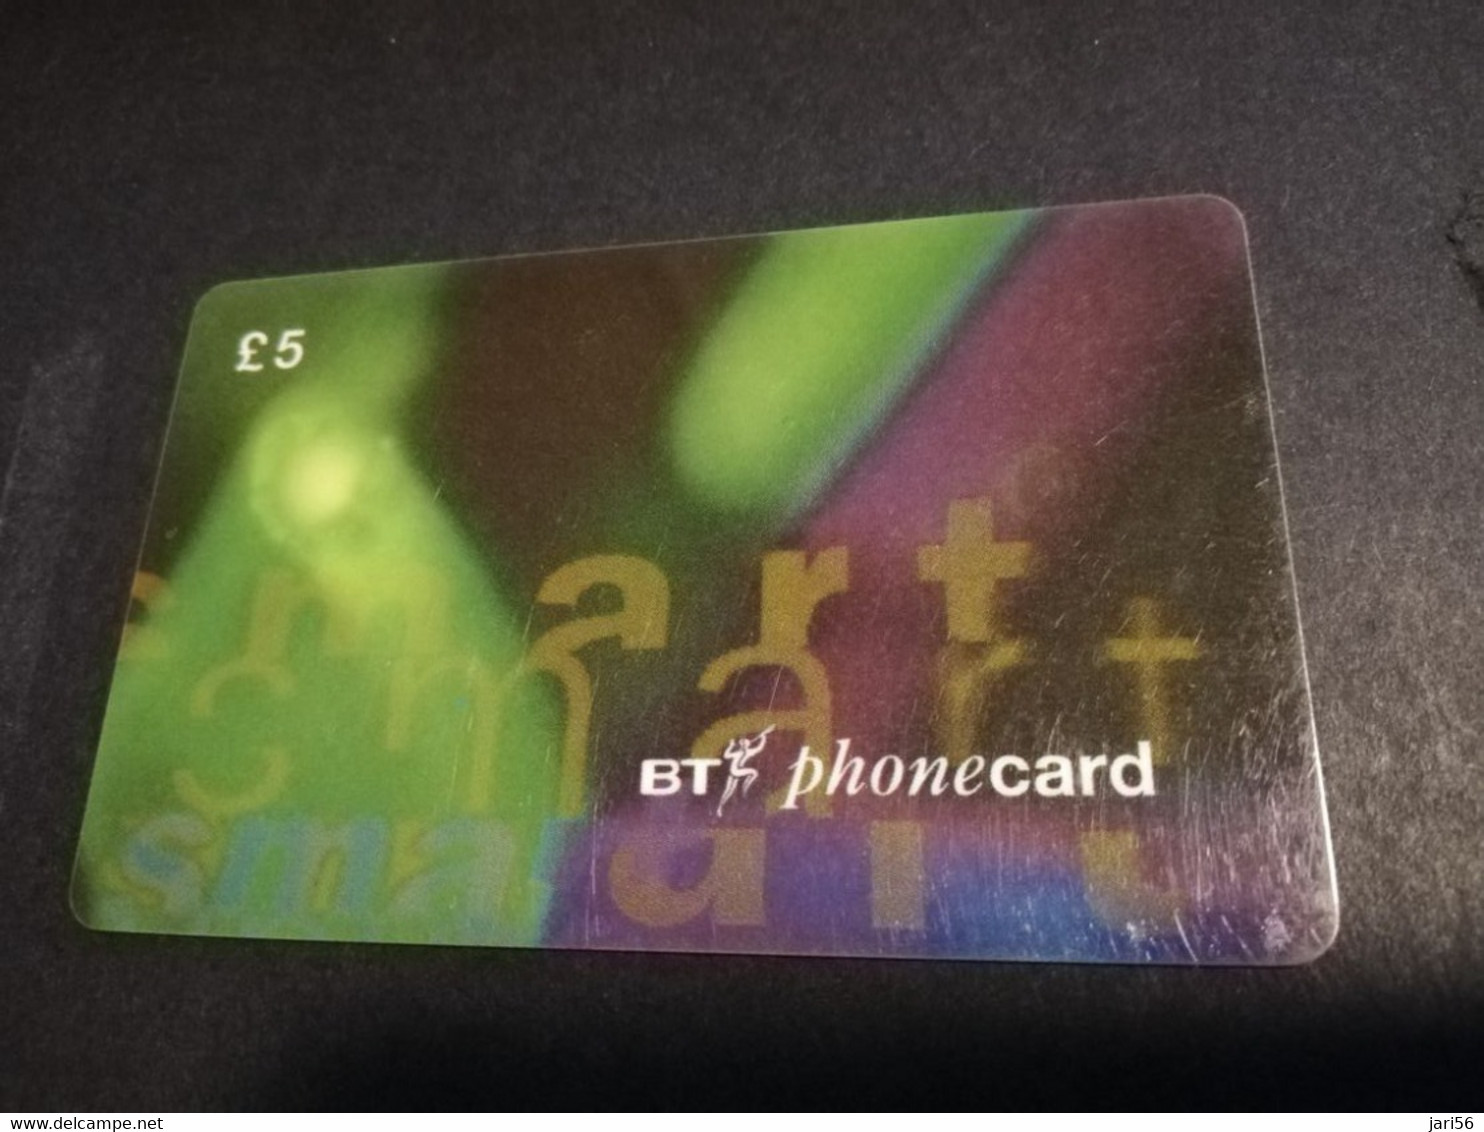 GREAT BRETAGNE  CHIPCARDS / TEST CARD 5 POUND    EXPIRY DATE 09/96   PERFECT  CONDITION     **4595** - BT Generale